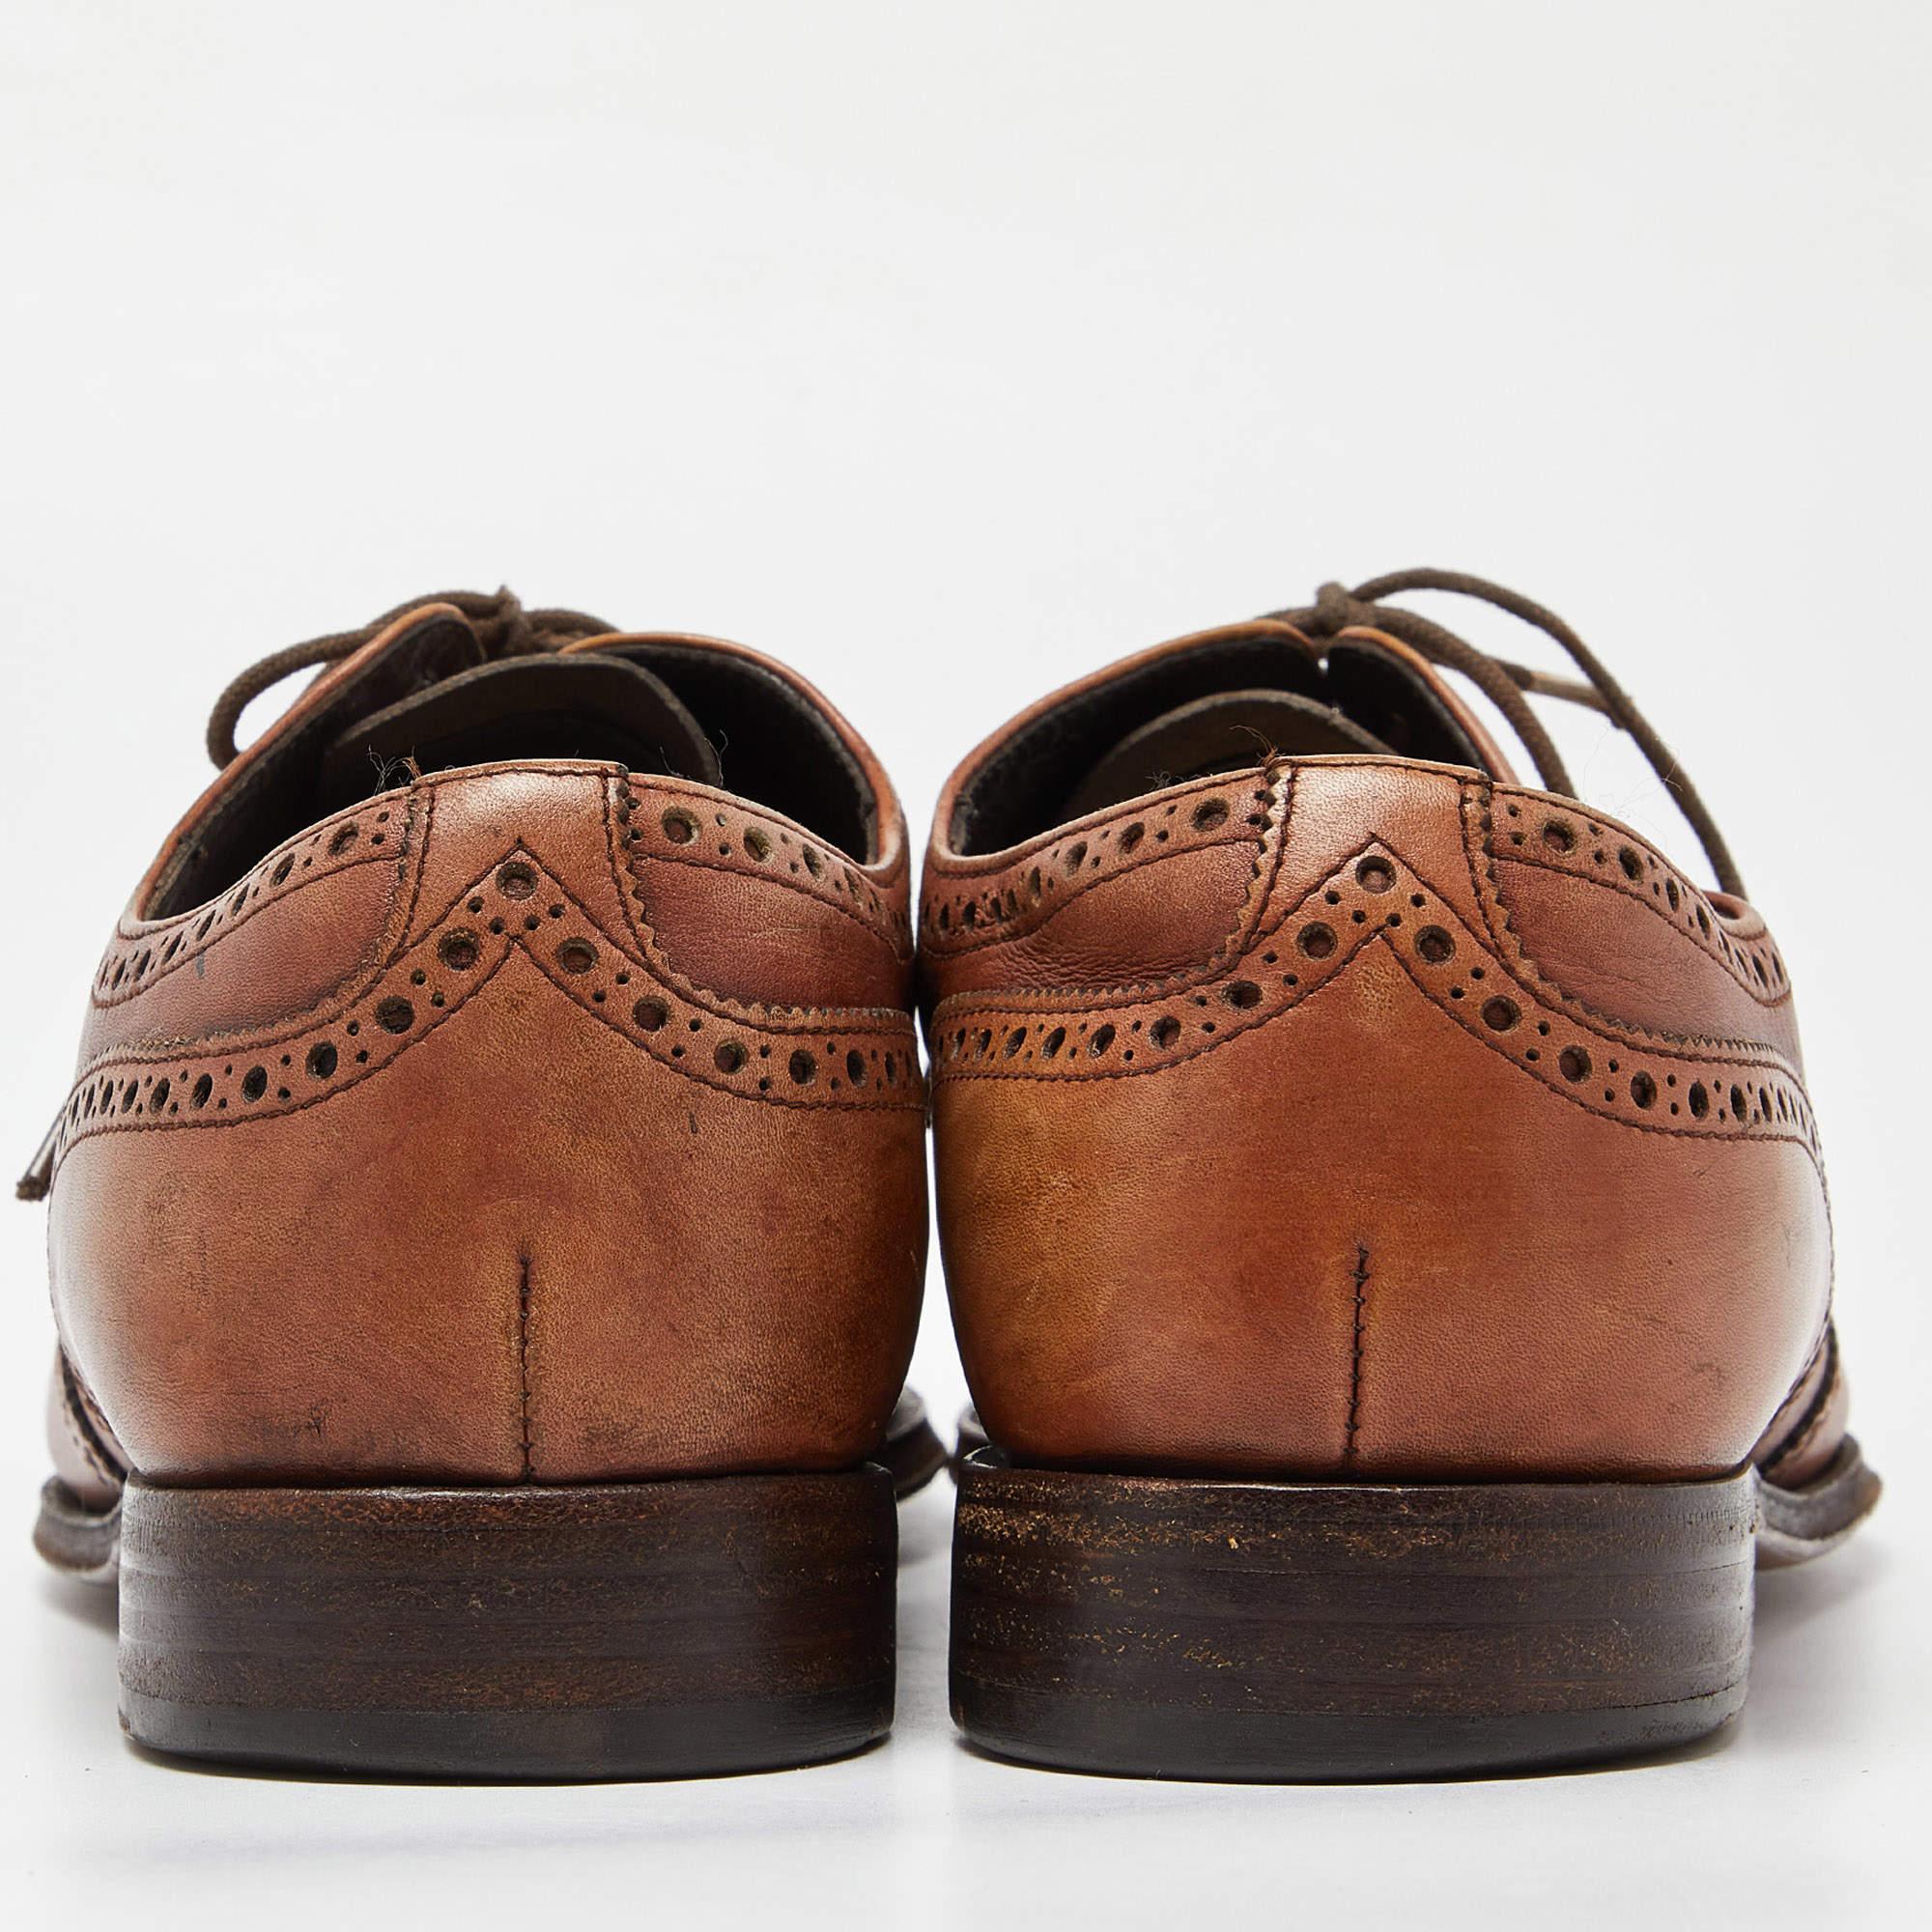 Prada Brown Leather Lace Up Oxfords Size 41 For Sale 2